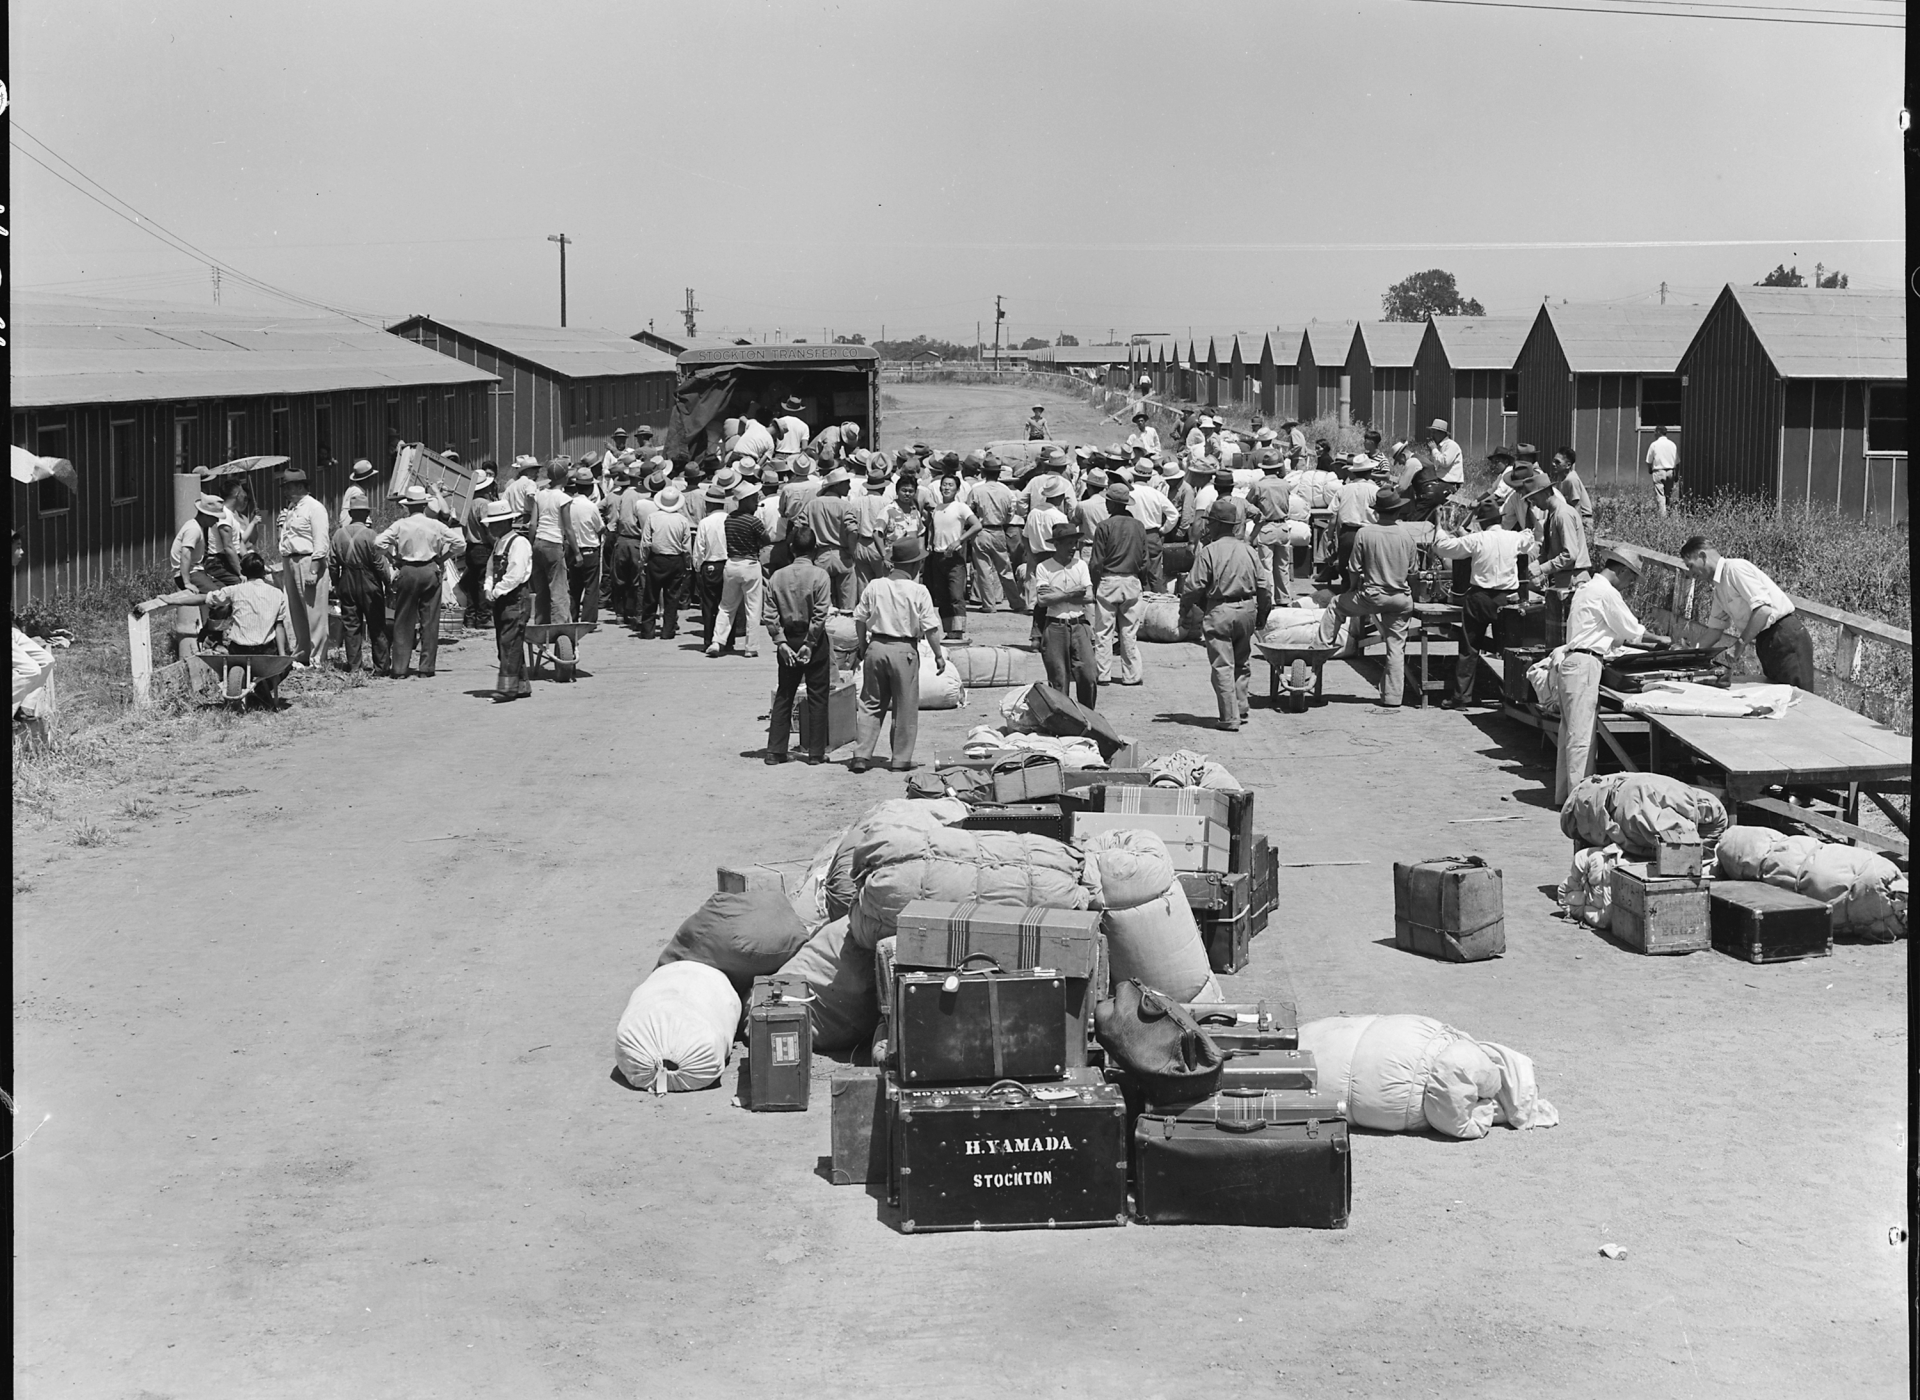 Japanese Americans arriving at an assembly center near Stockton, California. Their possessions are piled outside awaiting inspection before being transferred to the barracks (1942).